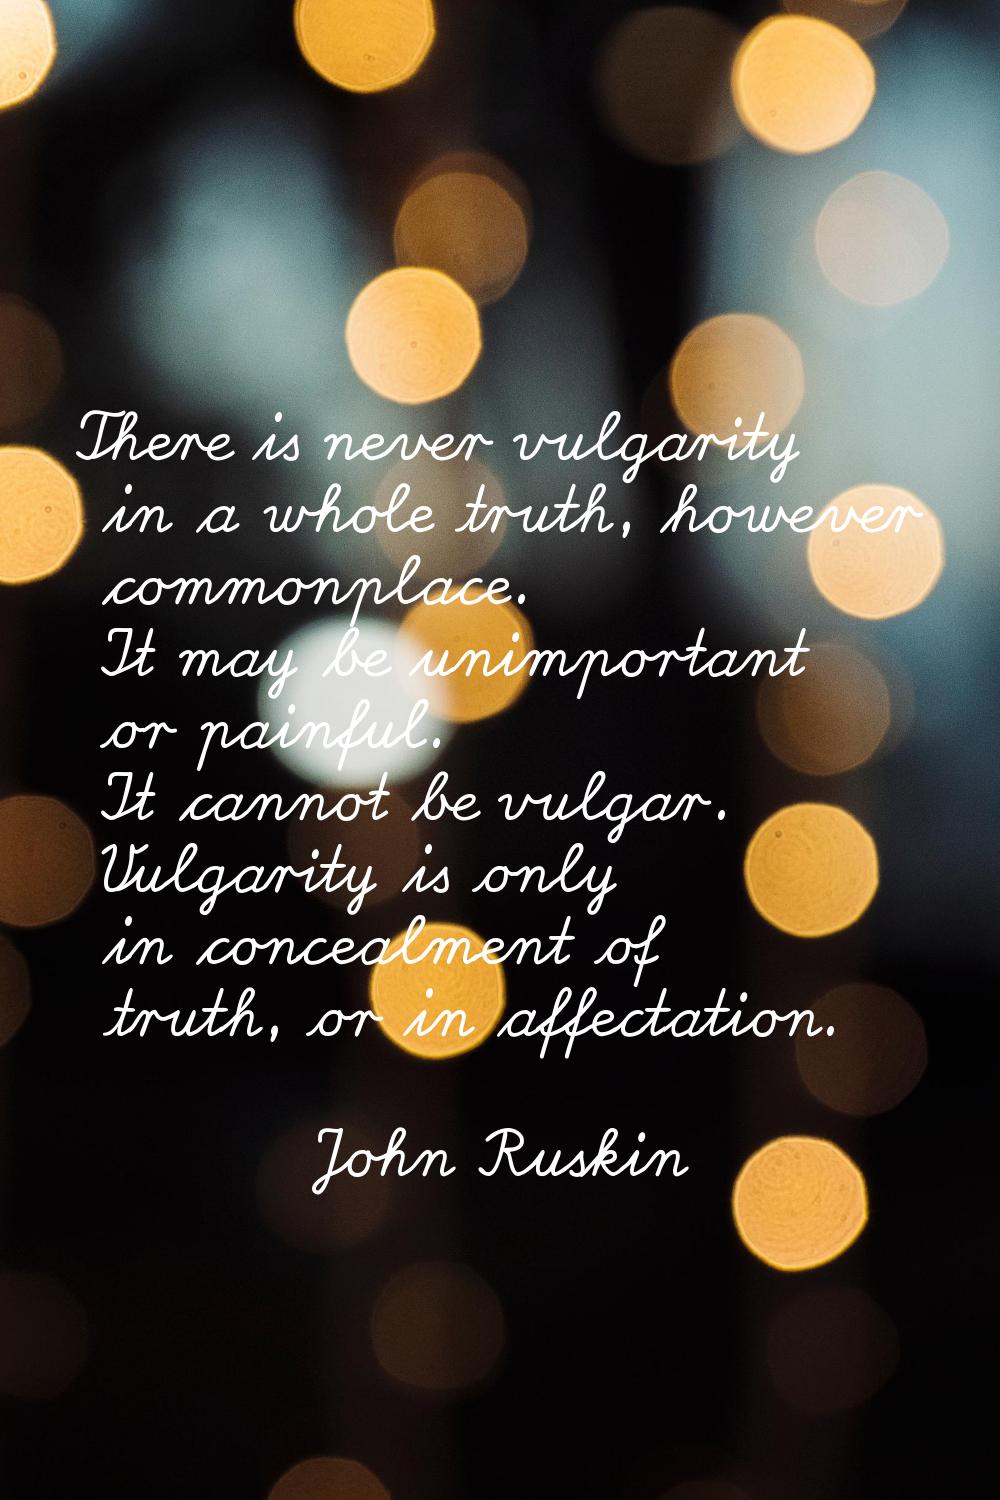 There is never vulgarity in a whole truth, however commonplace. It may be unimportant or painful. I